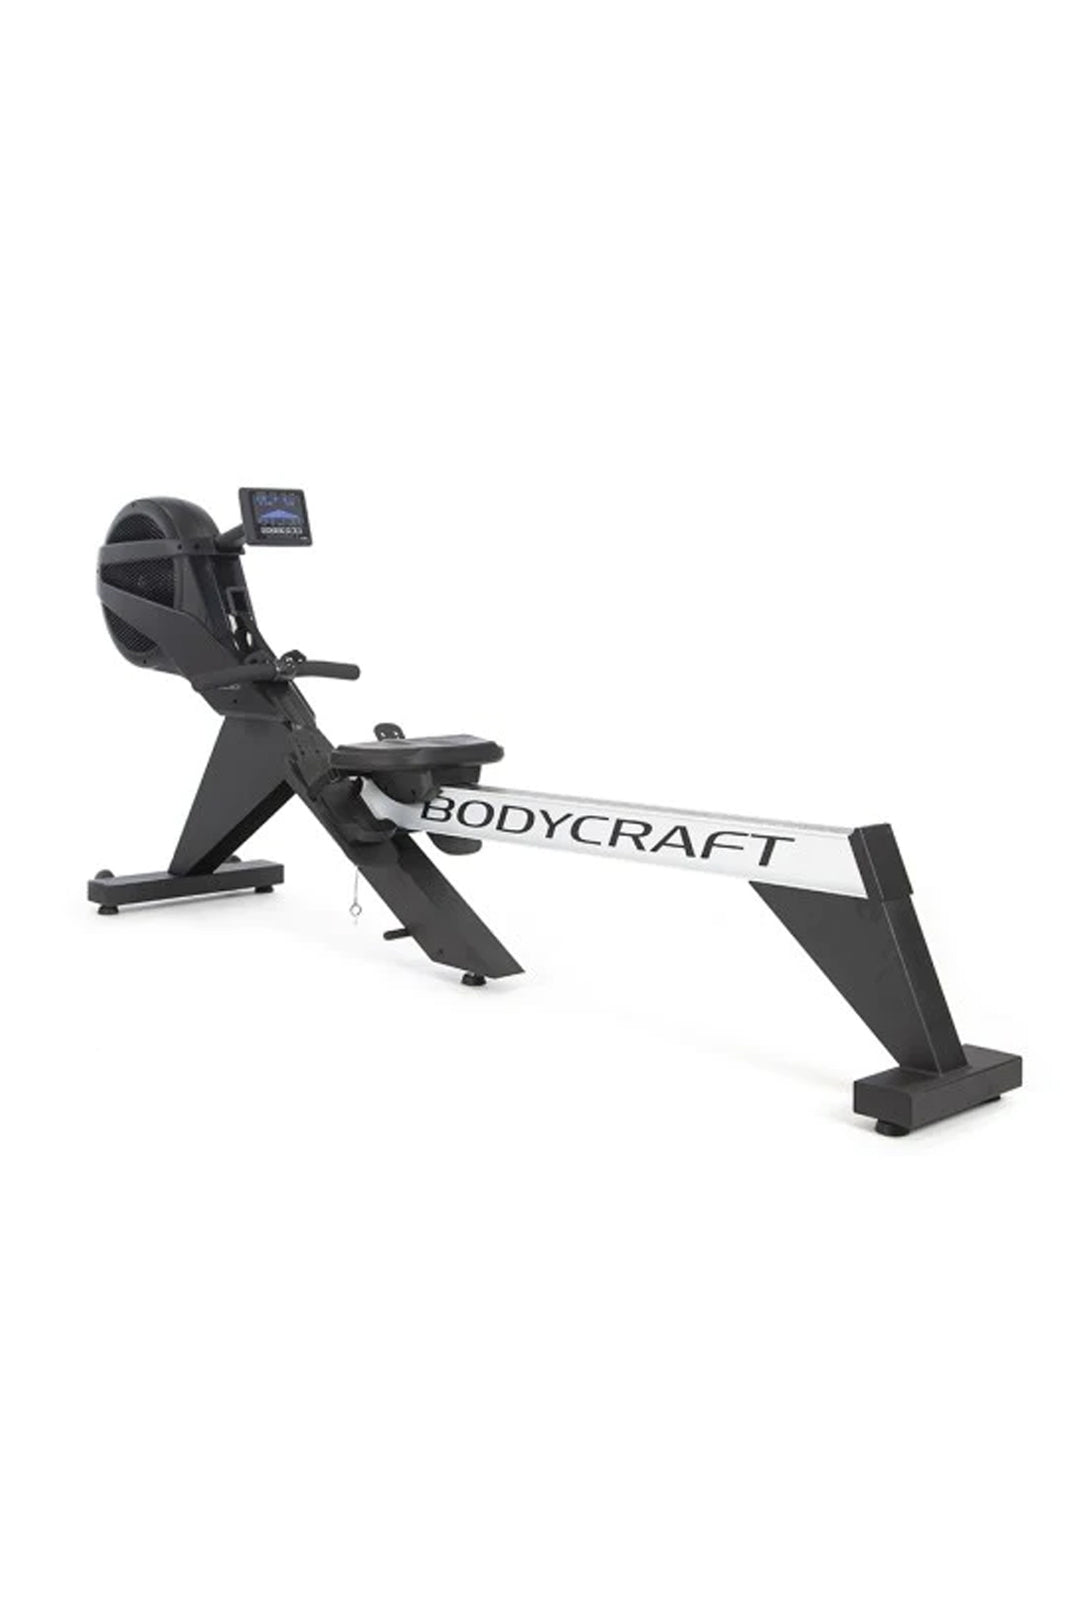 Bodycraft KVR500 Pro Air & Magnetic Resistance Rowing Machine